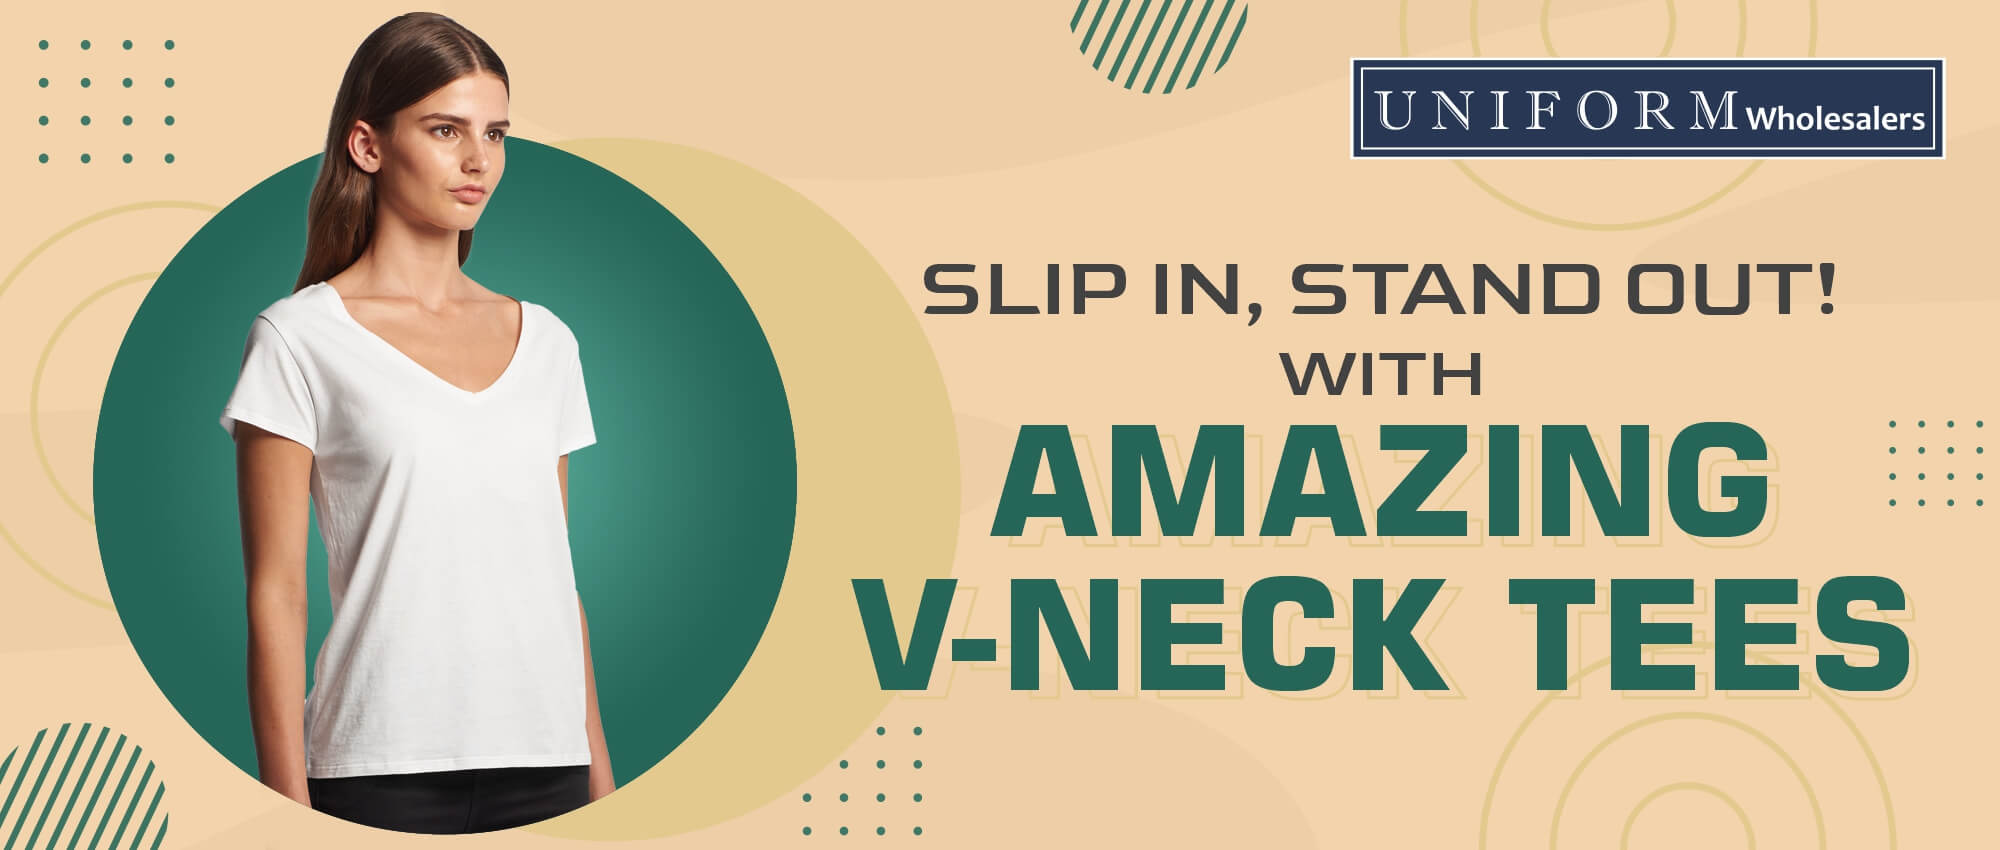 SLIP IN, STAND OUT! WITH AMAZING V-NECK TEES – Uniform Wholesalers